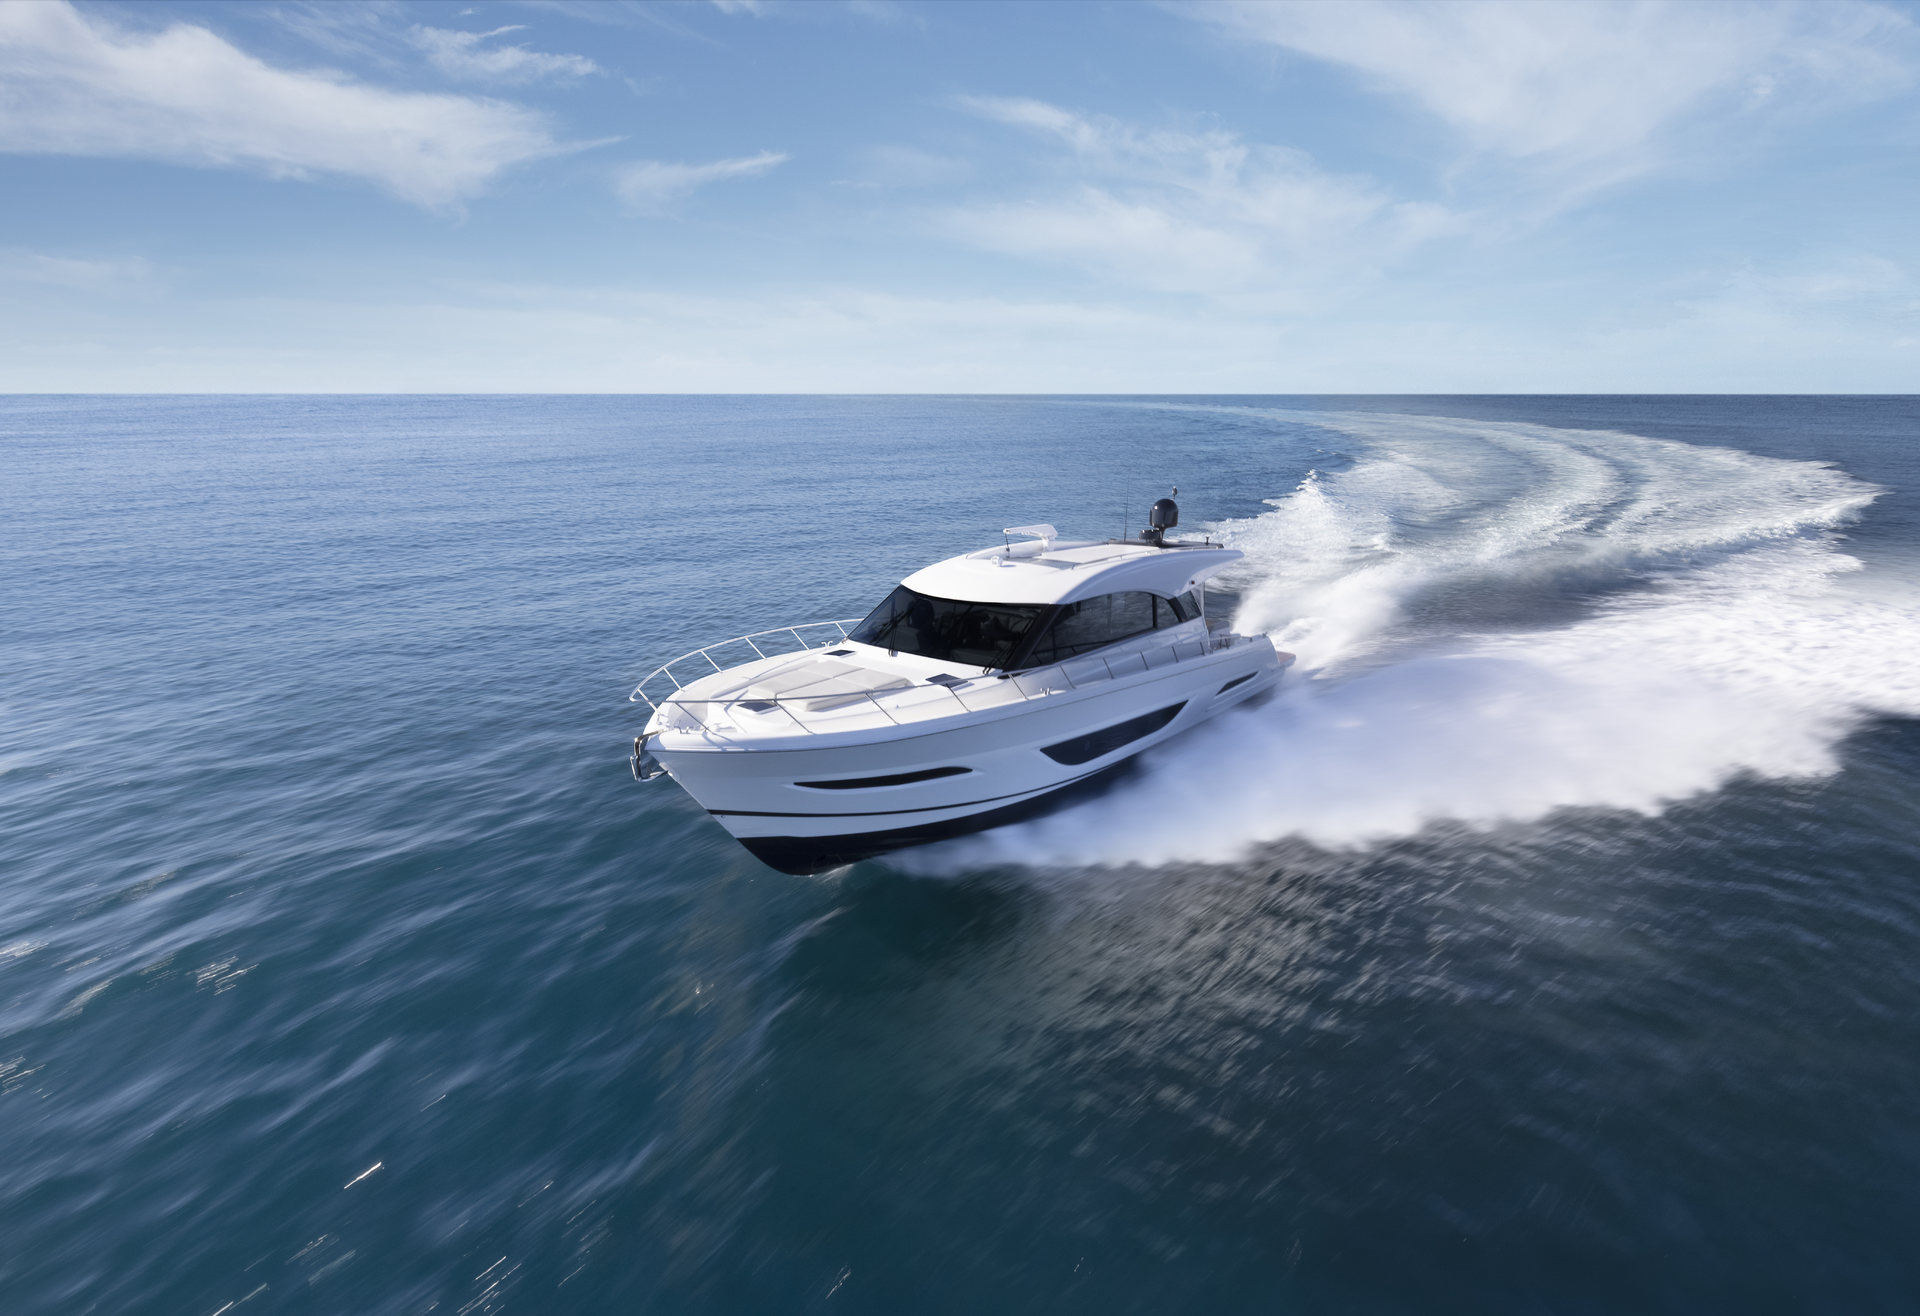 360 VR Virtual Tours of the Maritimo S55